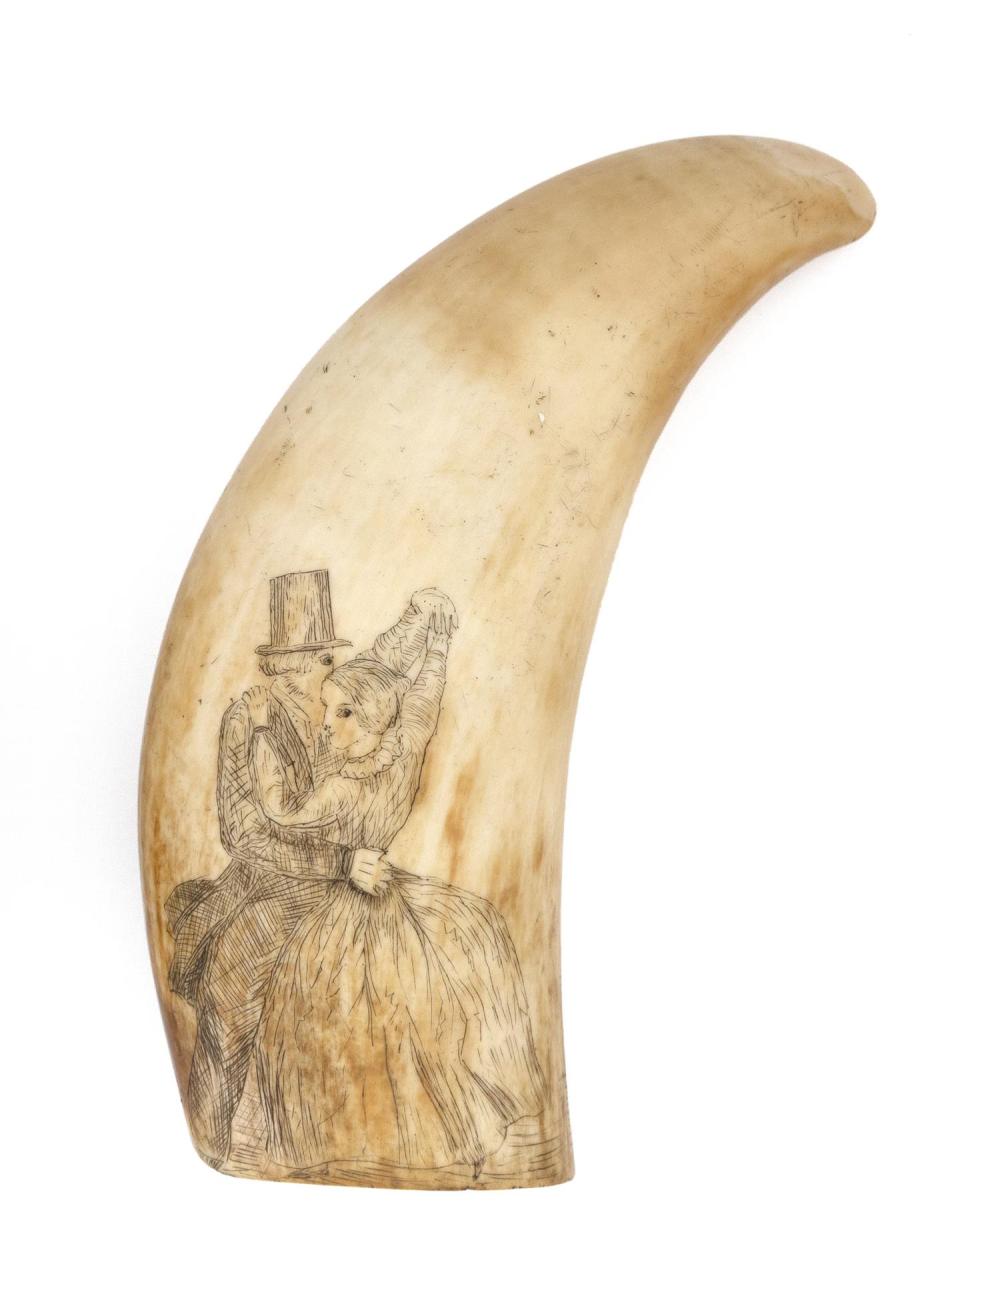 SCRIMSHAW WHALE S TOOTH DEPICTING 34c685